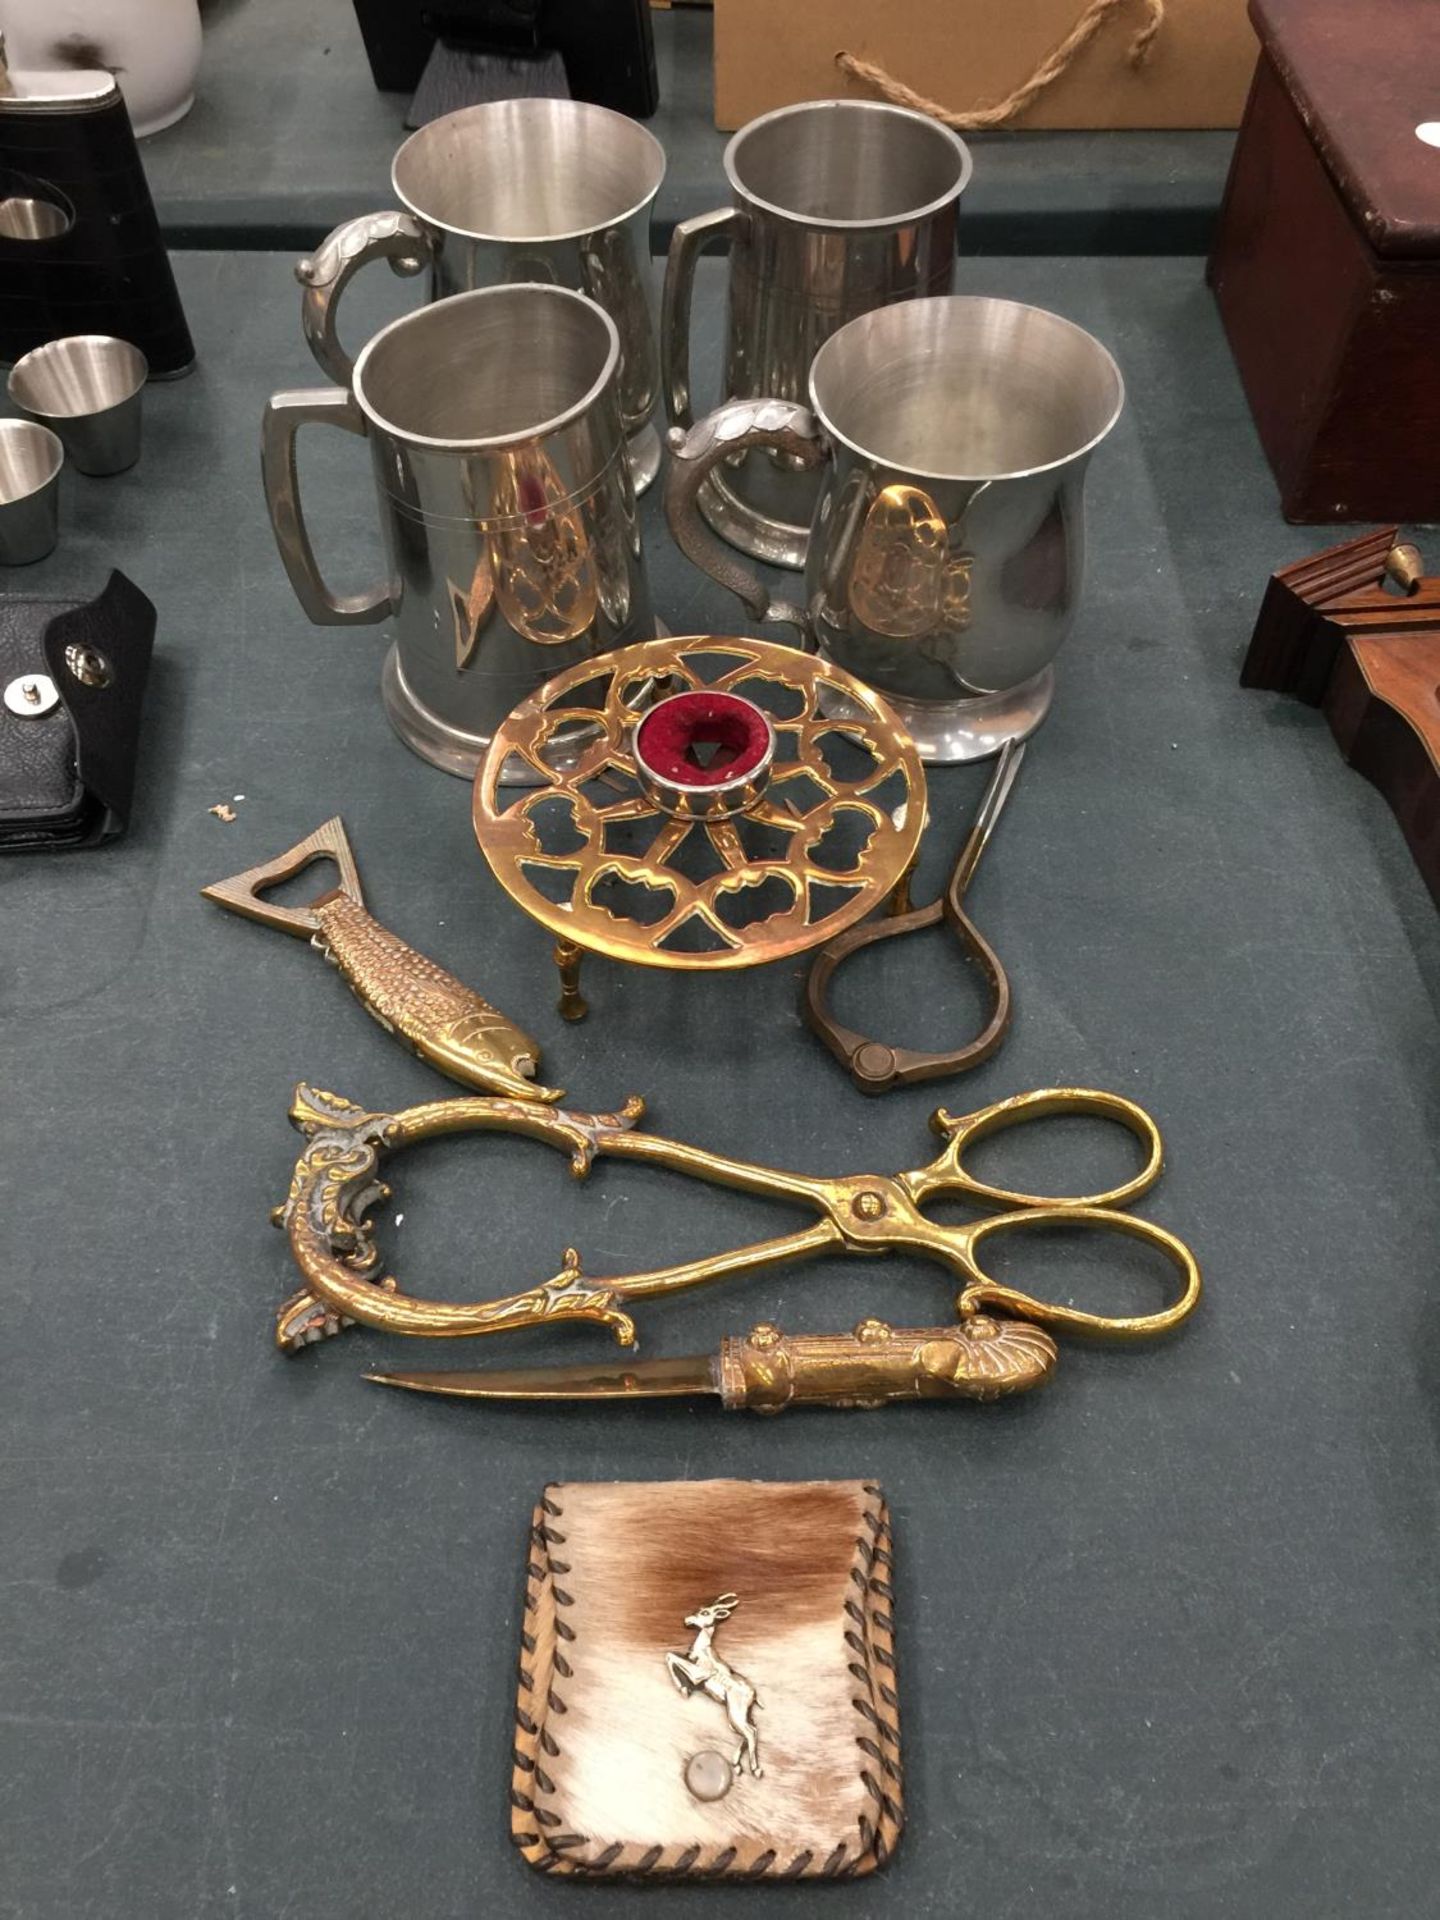 FOUR SILVER PLATED TANKARDS PLUS BRASSWARE INCLUDING TONGS, A KNIFE, BOTTLE OPENER, ETC